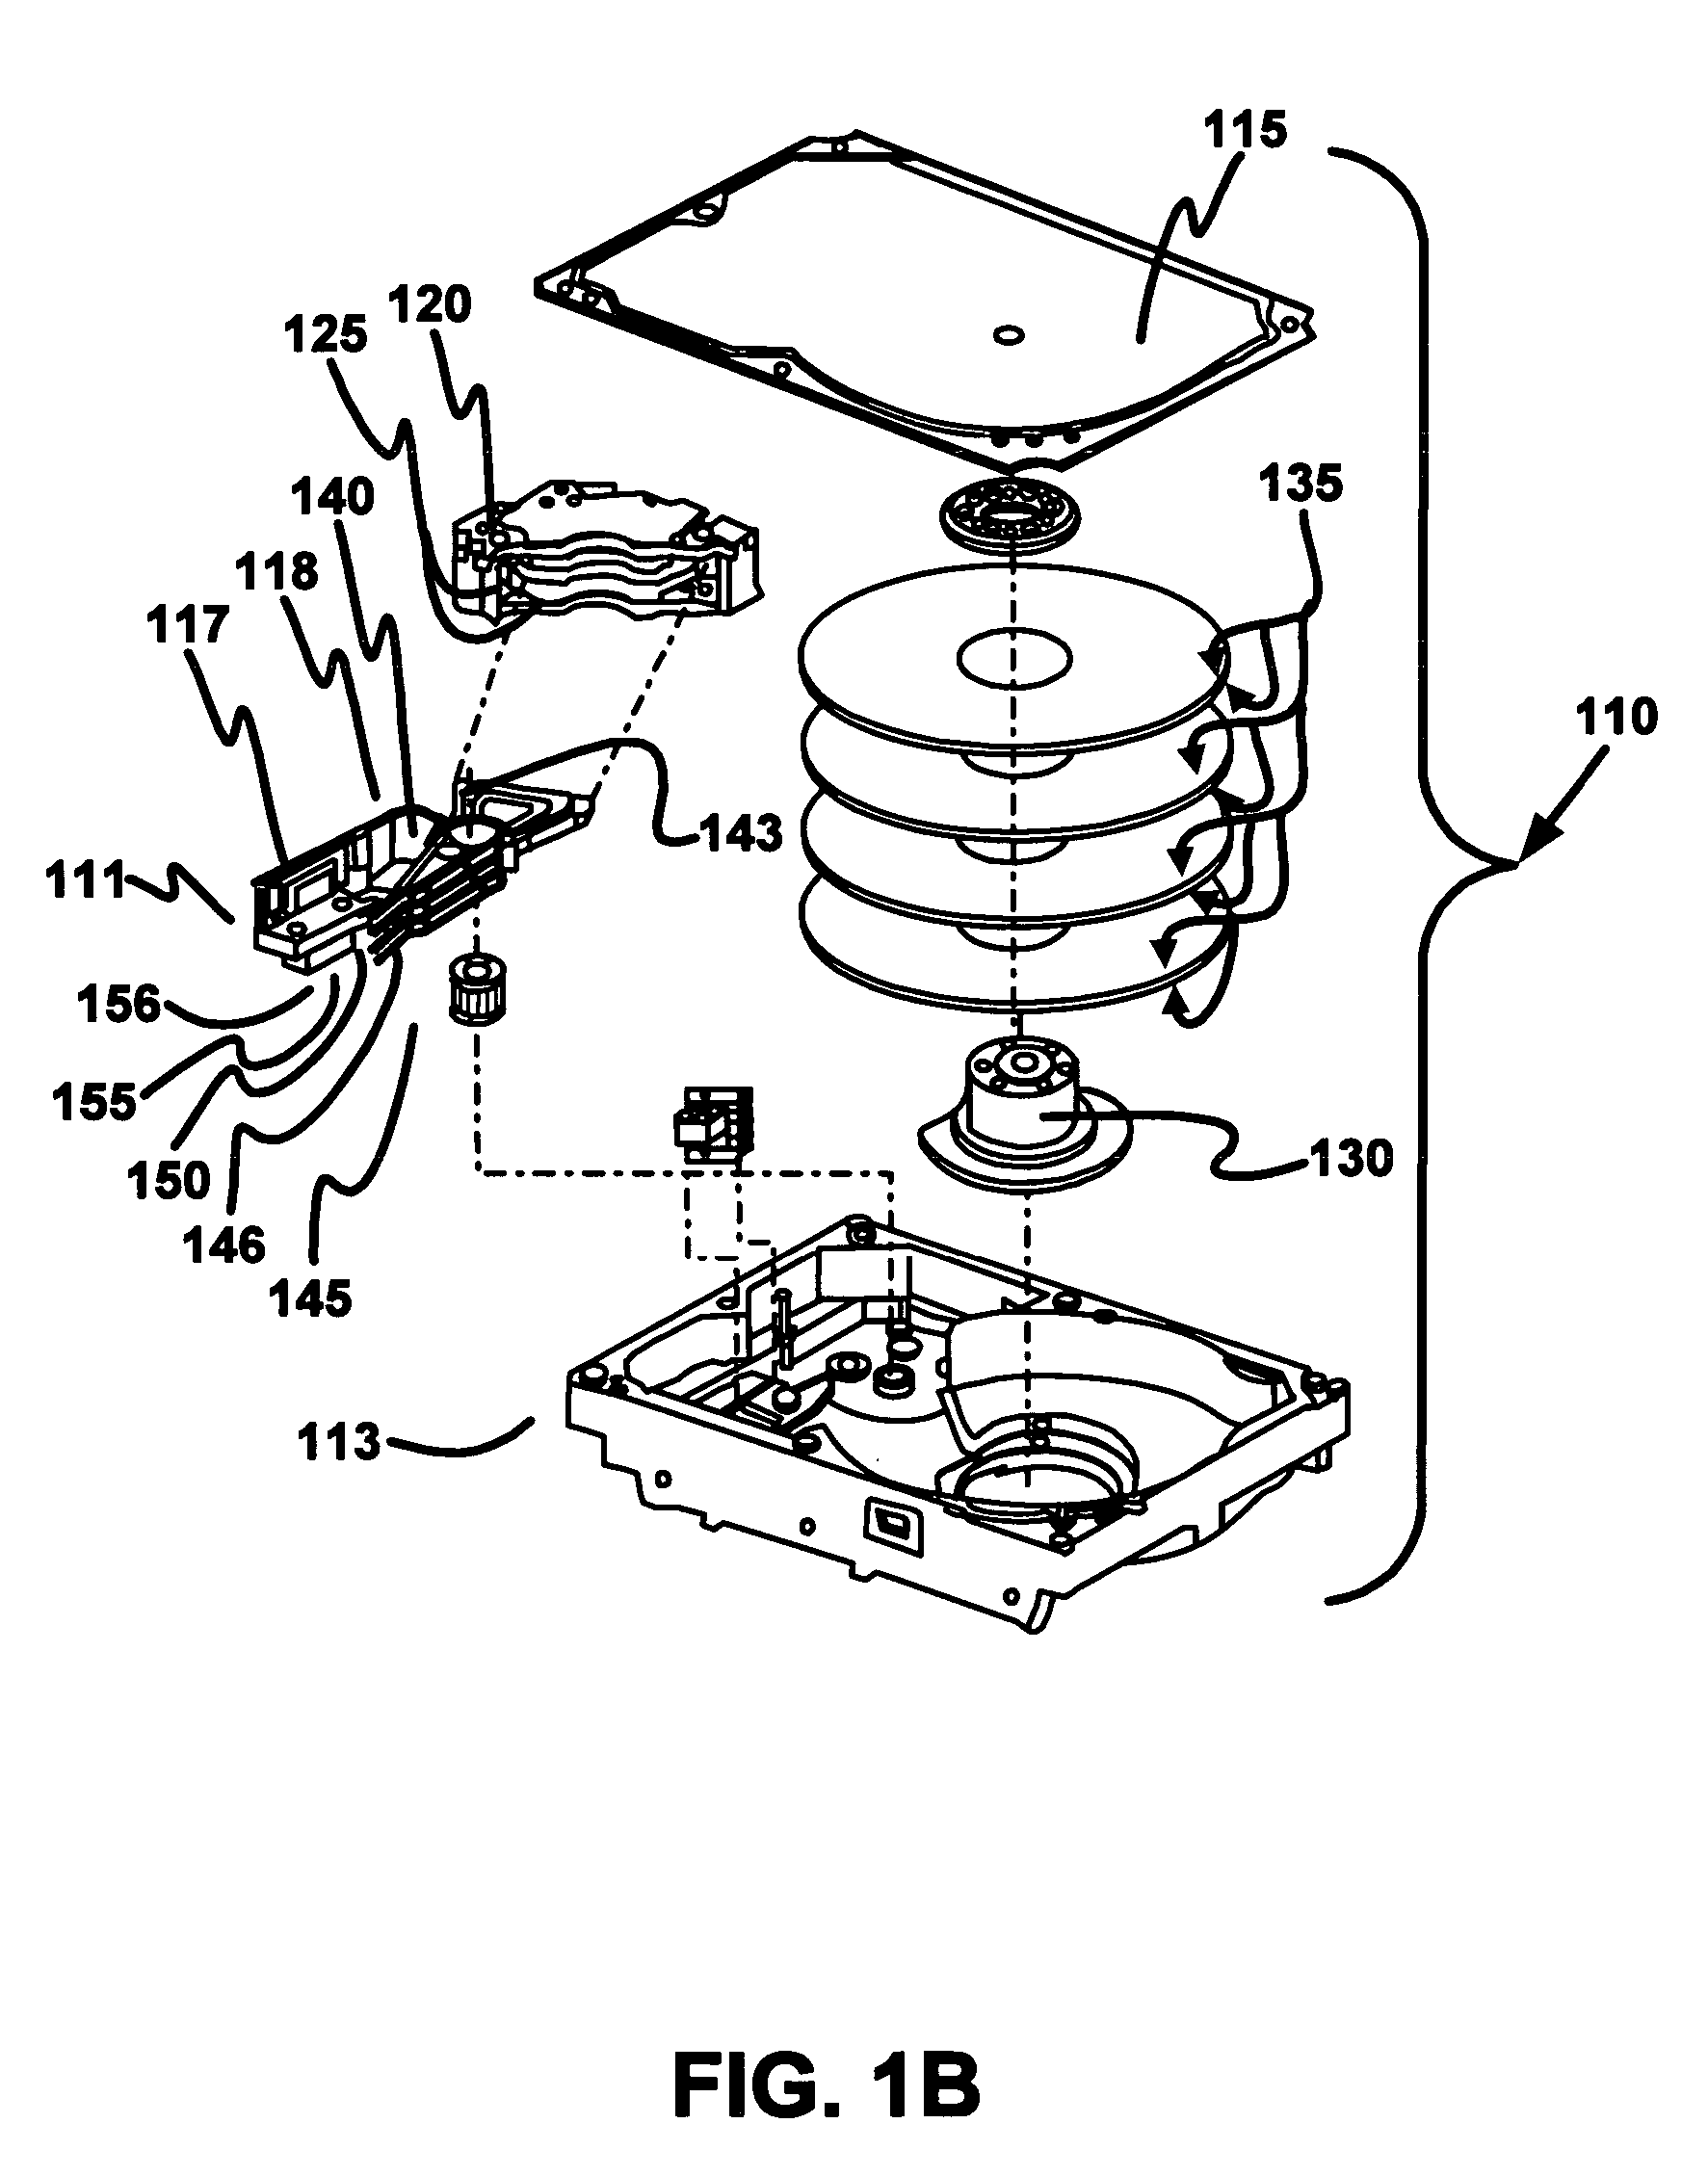 Hermetically sealed head disk assembly and method of sealing with soldering material